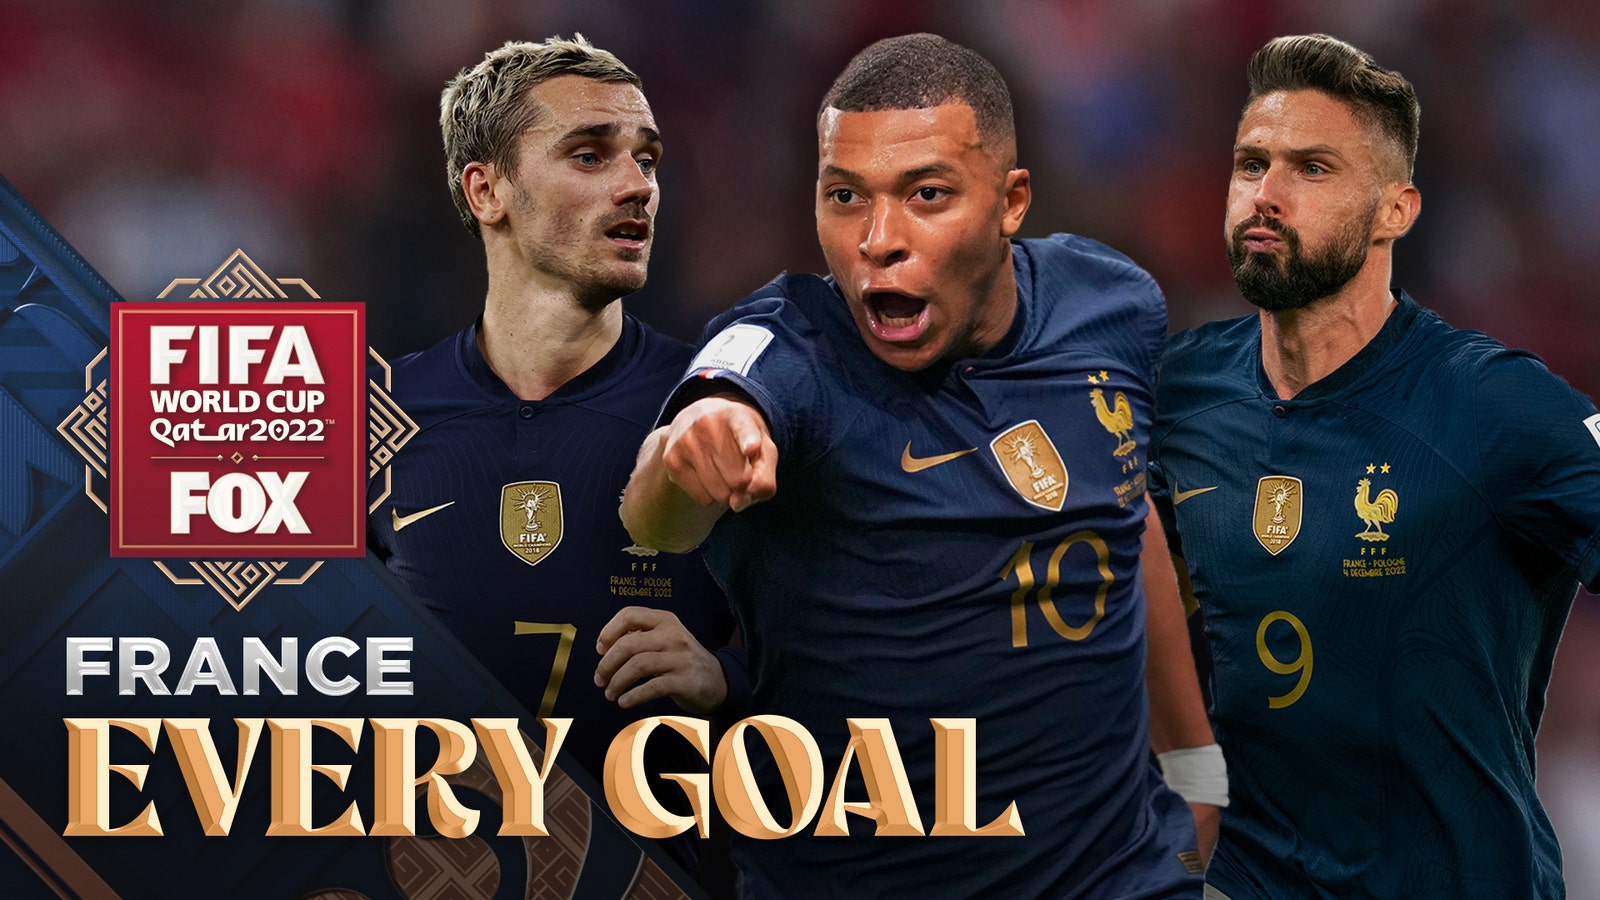 Kylian Mbappé, Olivier Giroud, Antoine Griezmann and all the goals for France at the 2022 FIFA World Cup